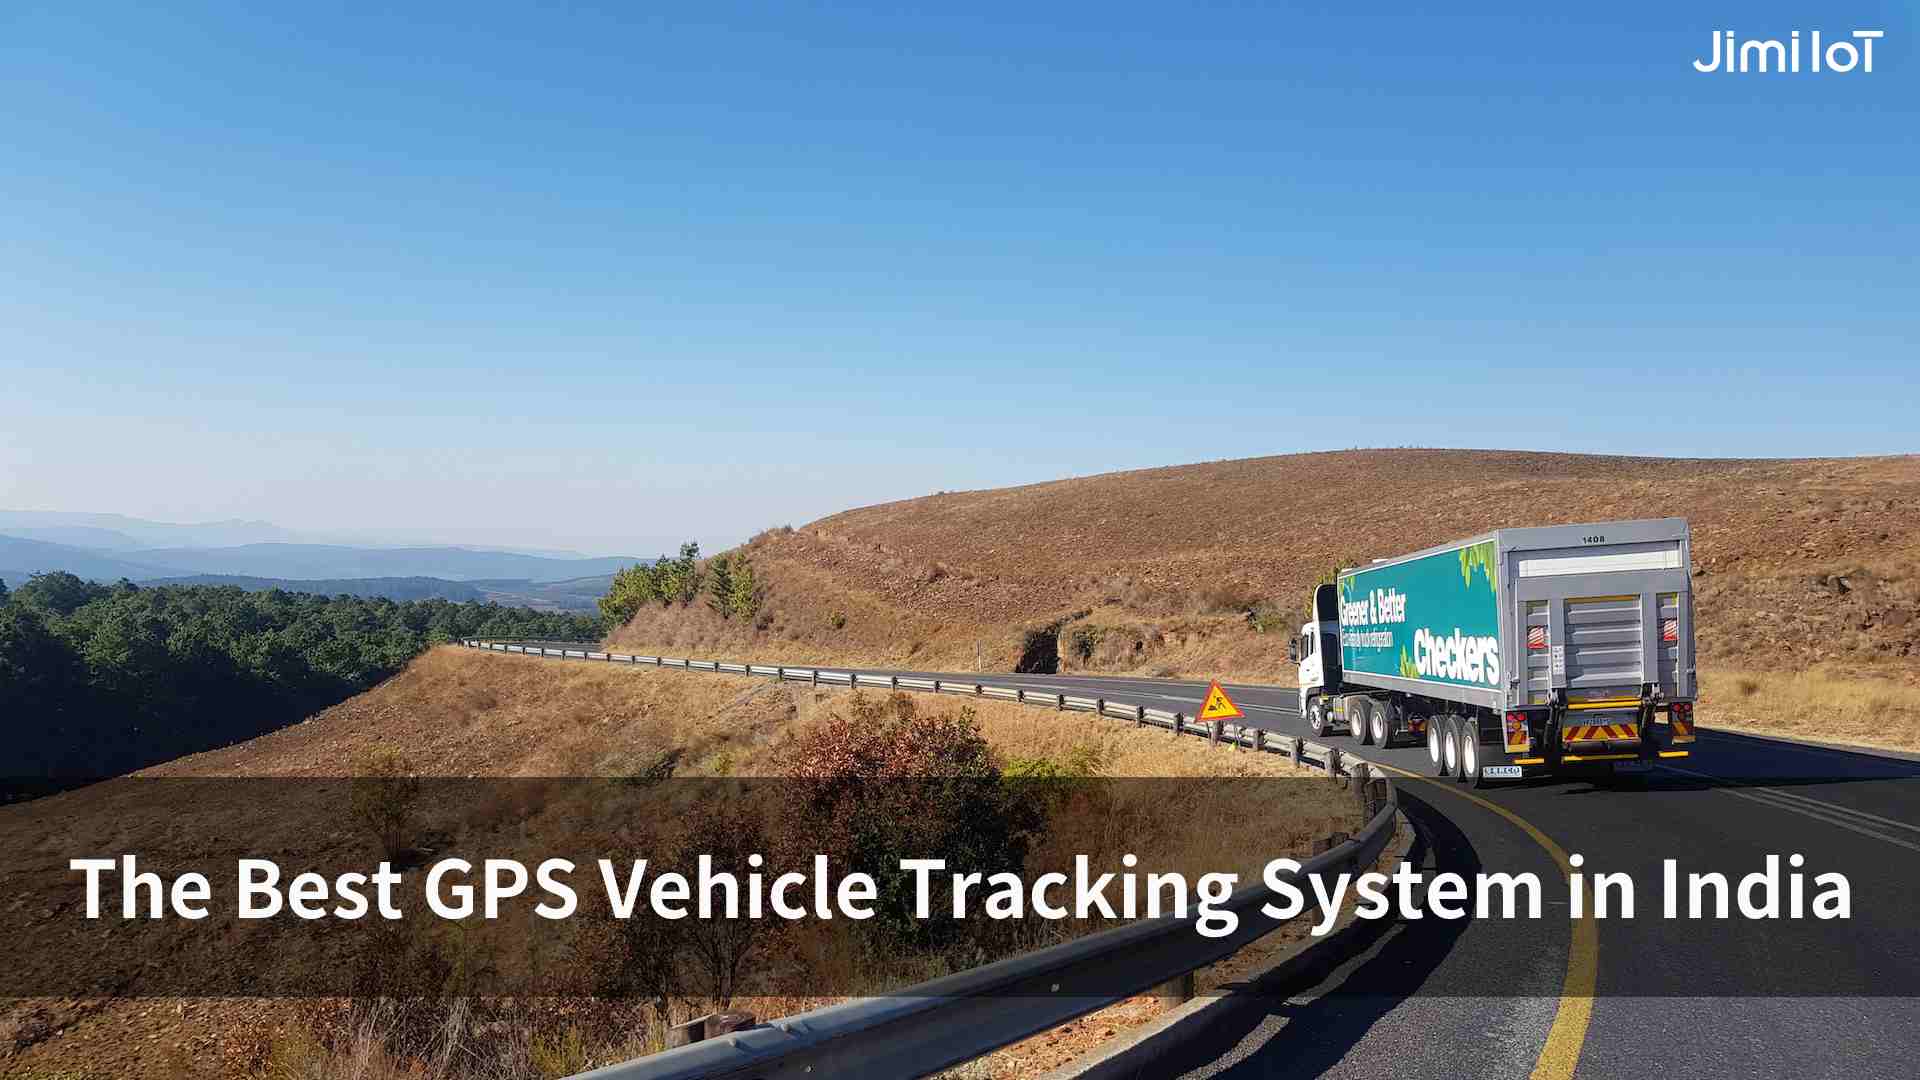 The Best GPS Vehicle Tracking System in India